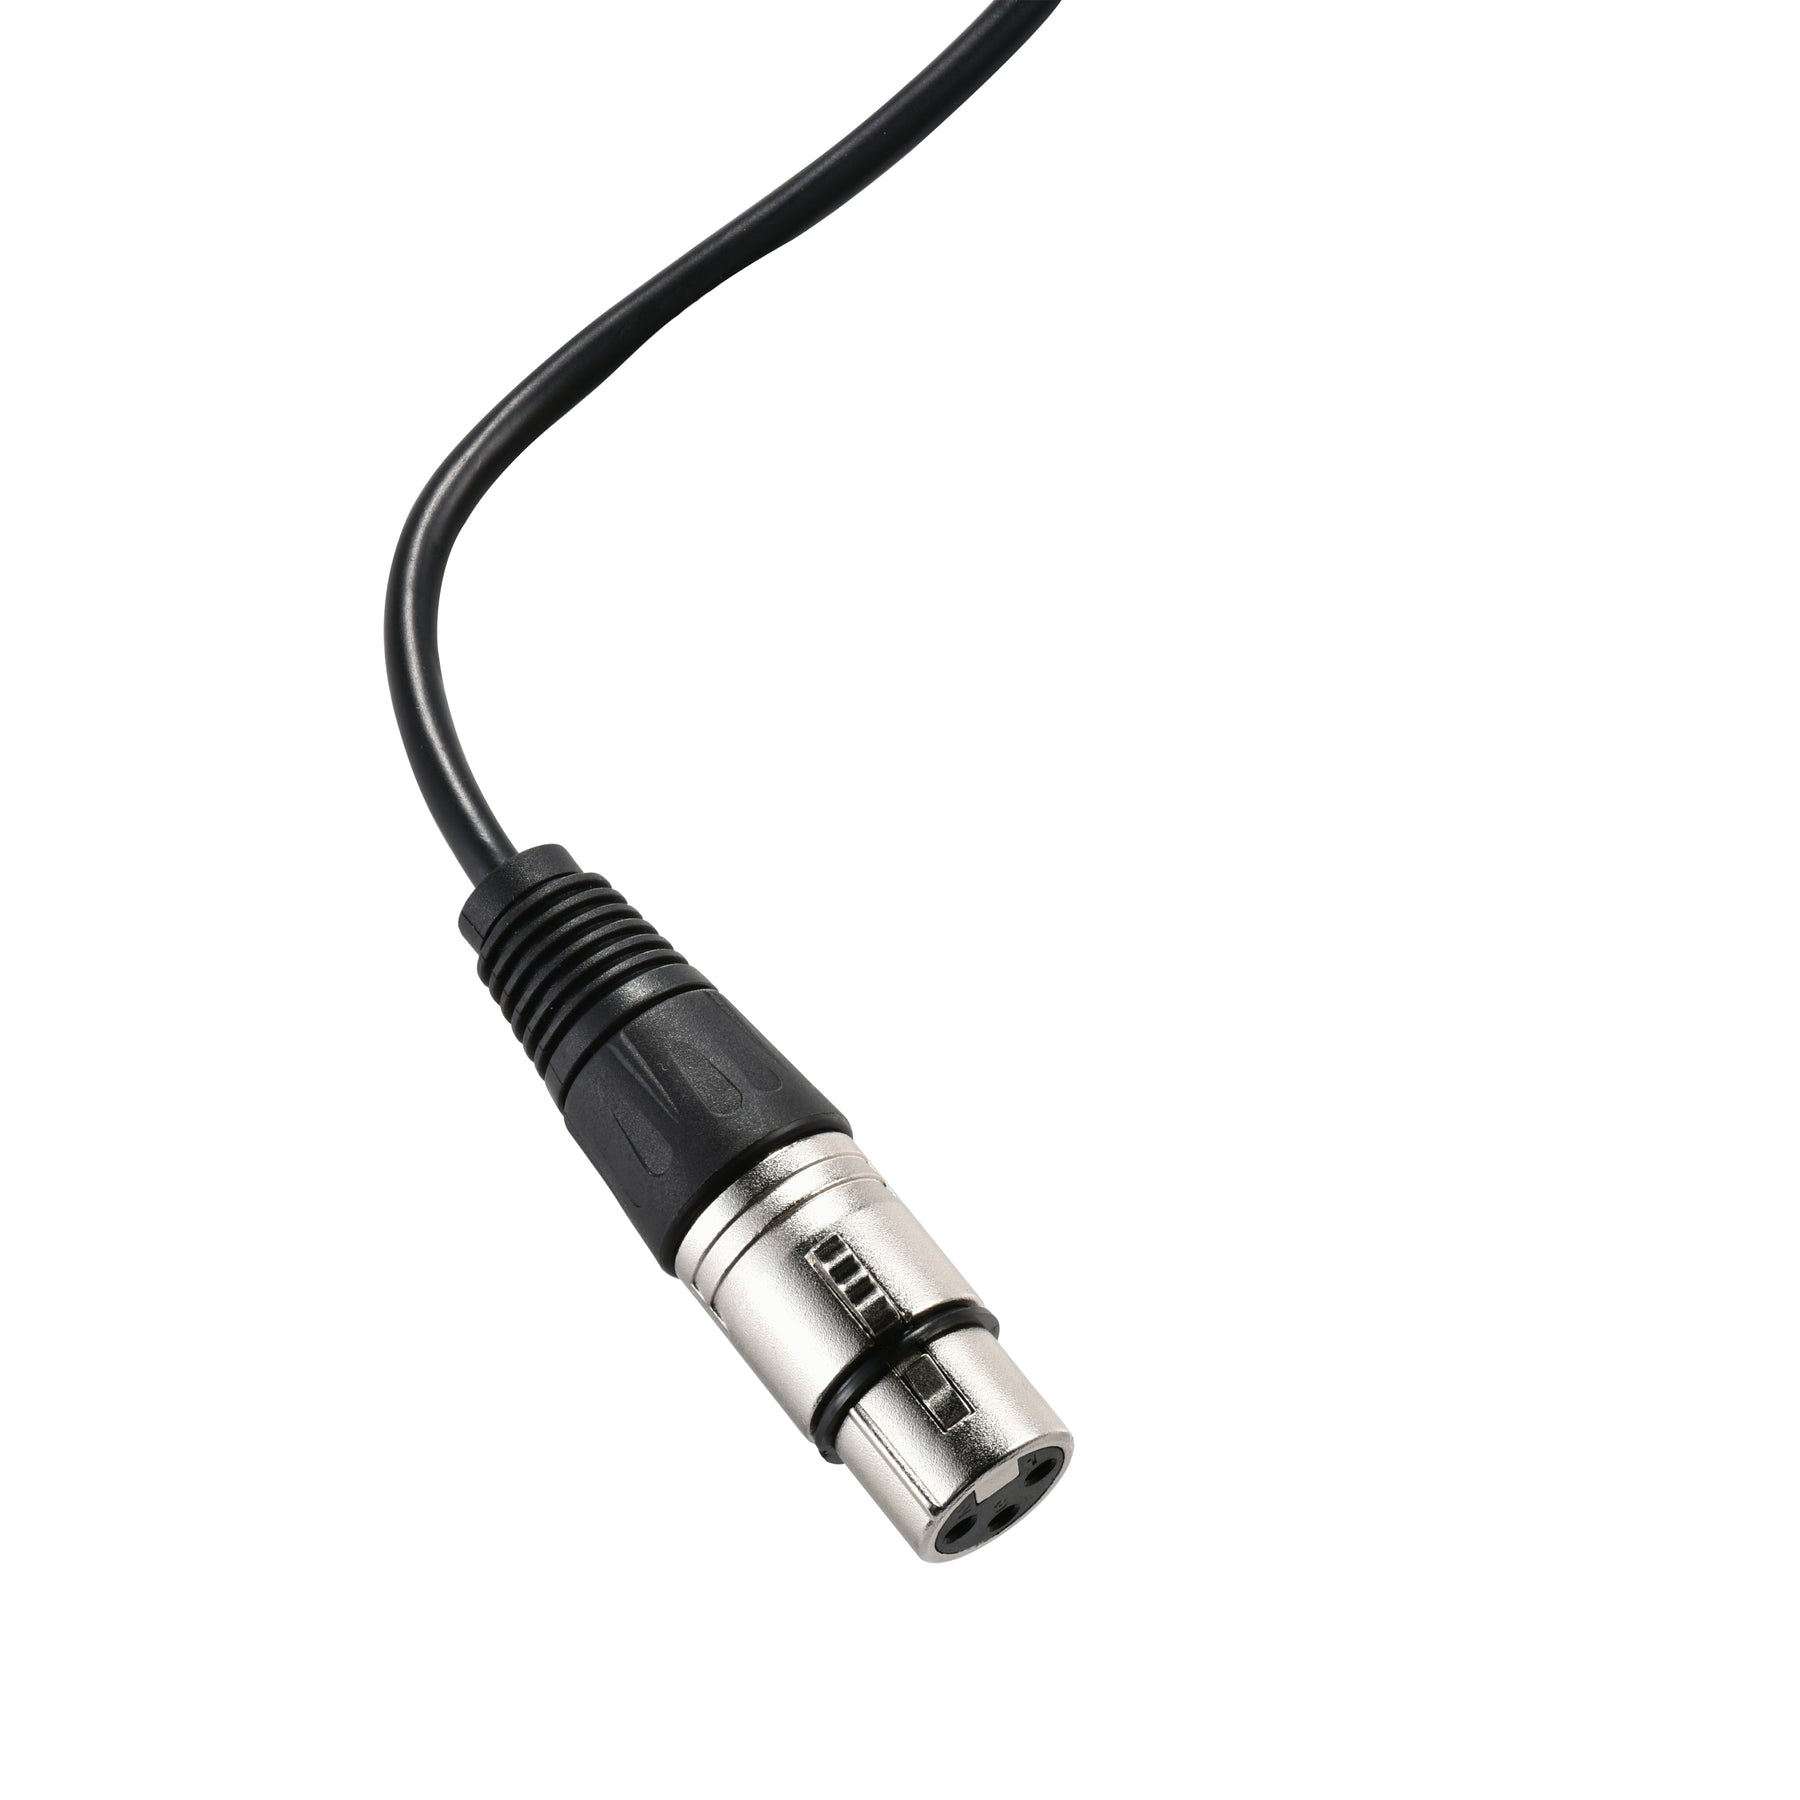 IBRA XLR Mic Cable Premium Quality Pro Microphone Lead | Balanced Male XLR to Female XLR | 6 Metre | Clearer Sound for PA Systems, Studio Recording, Mixers, Amplification & Speakers - BLACK